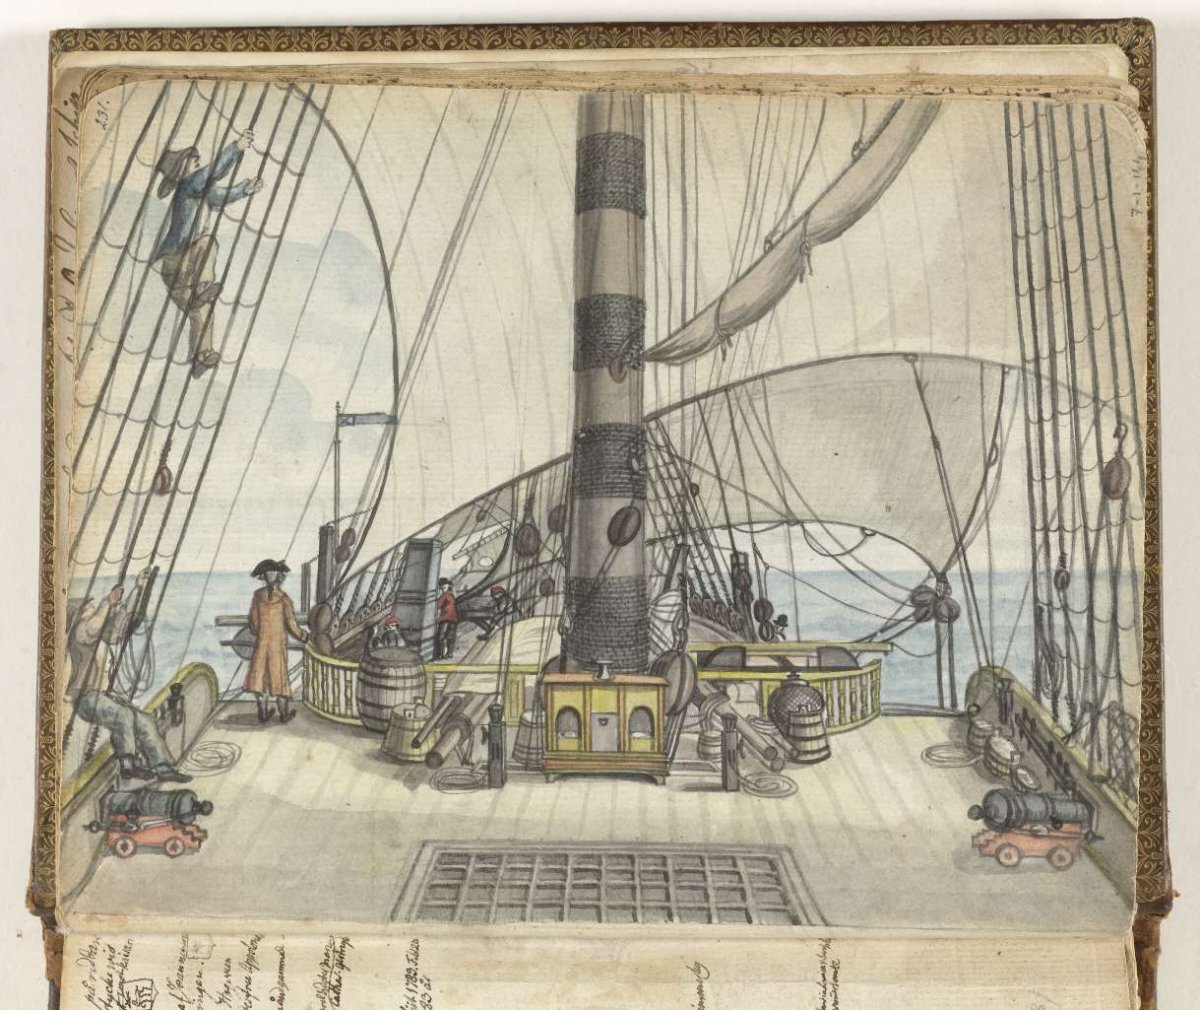 Deck view of a VOC ship to the main mast, Jan Brandes, 1778 - 1787